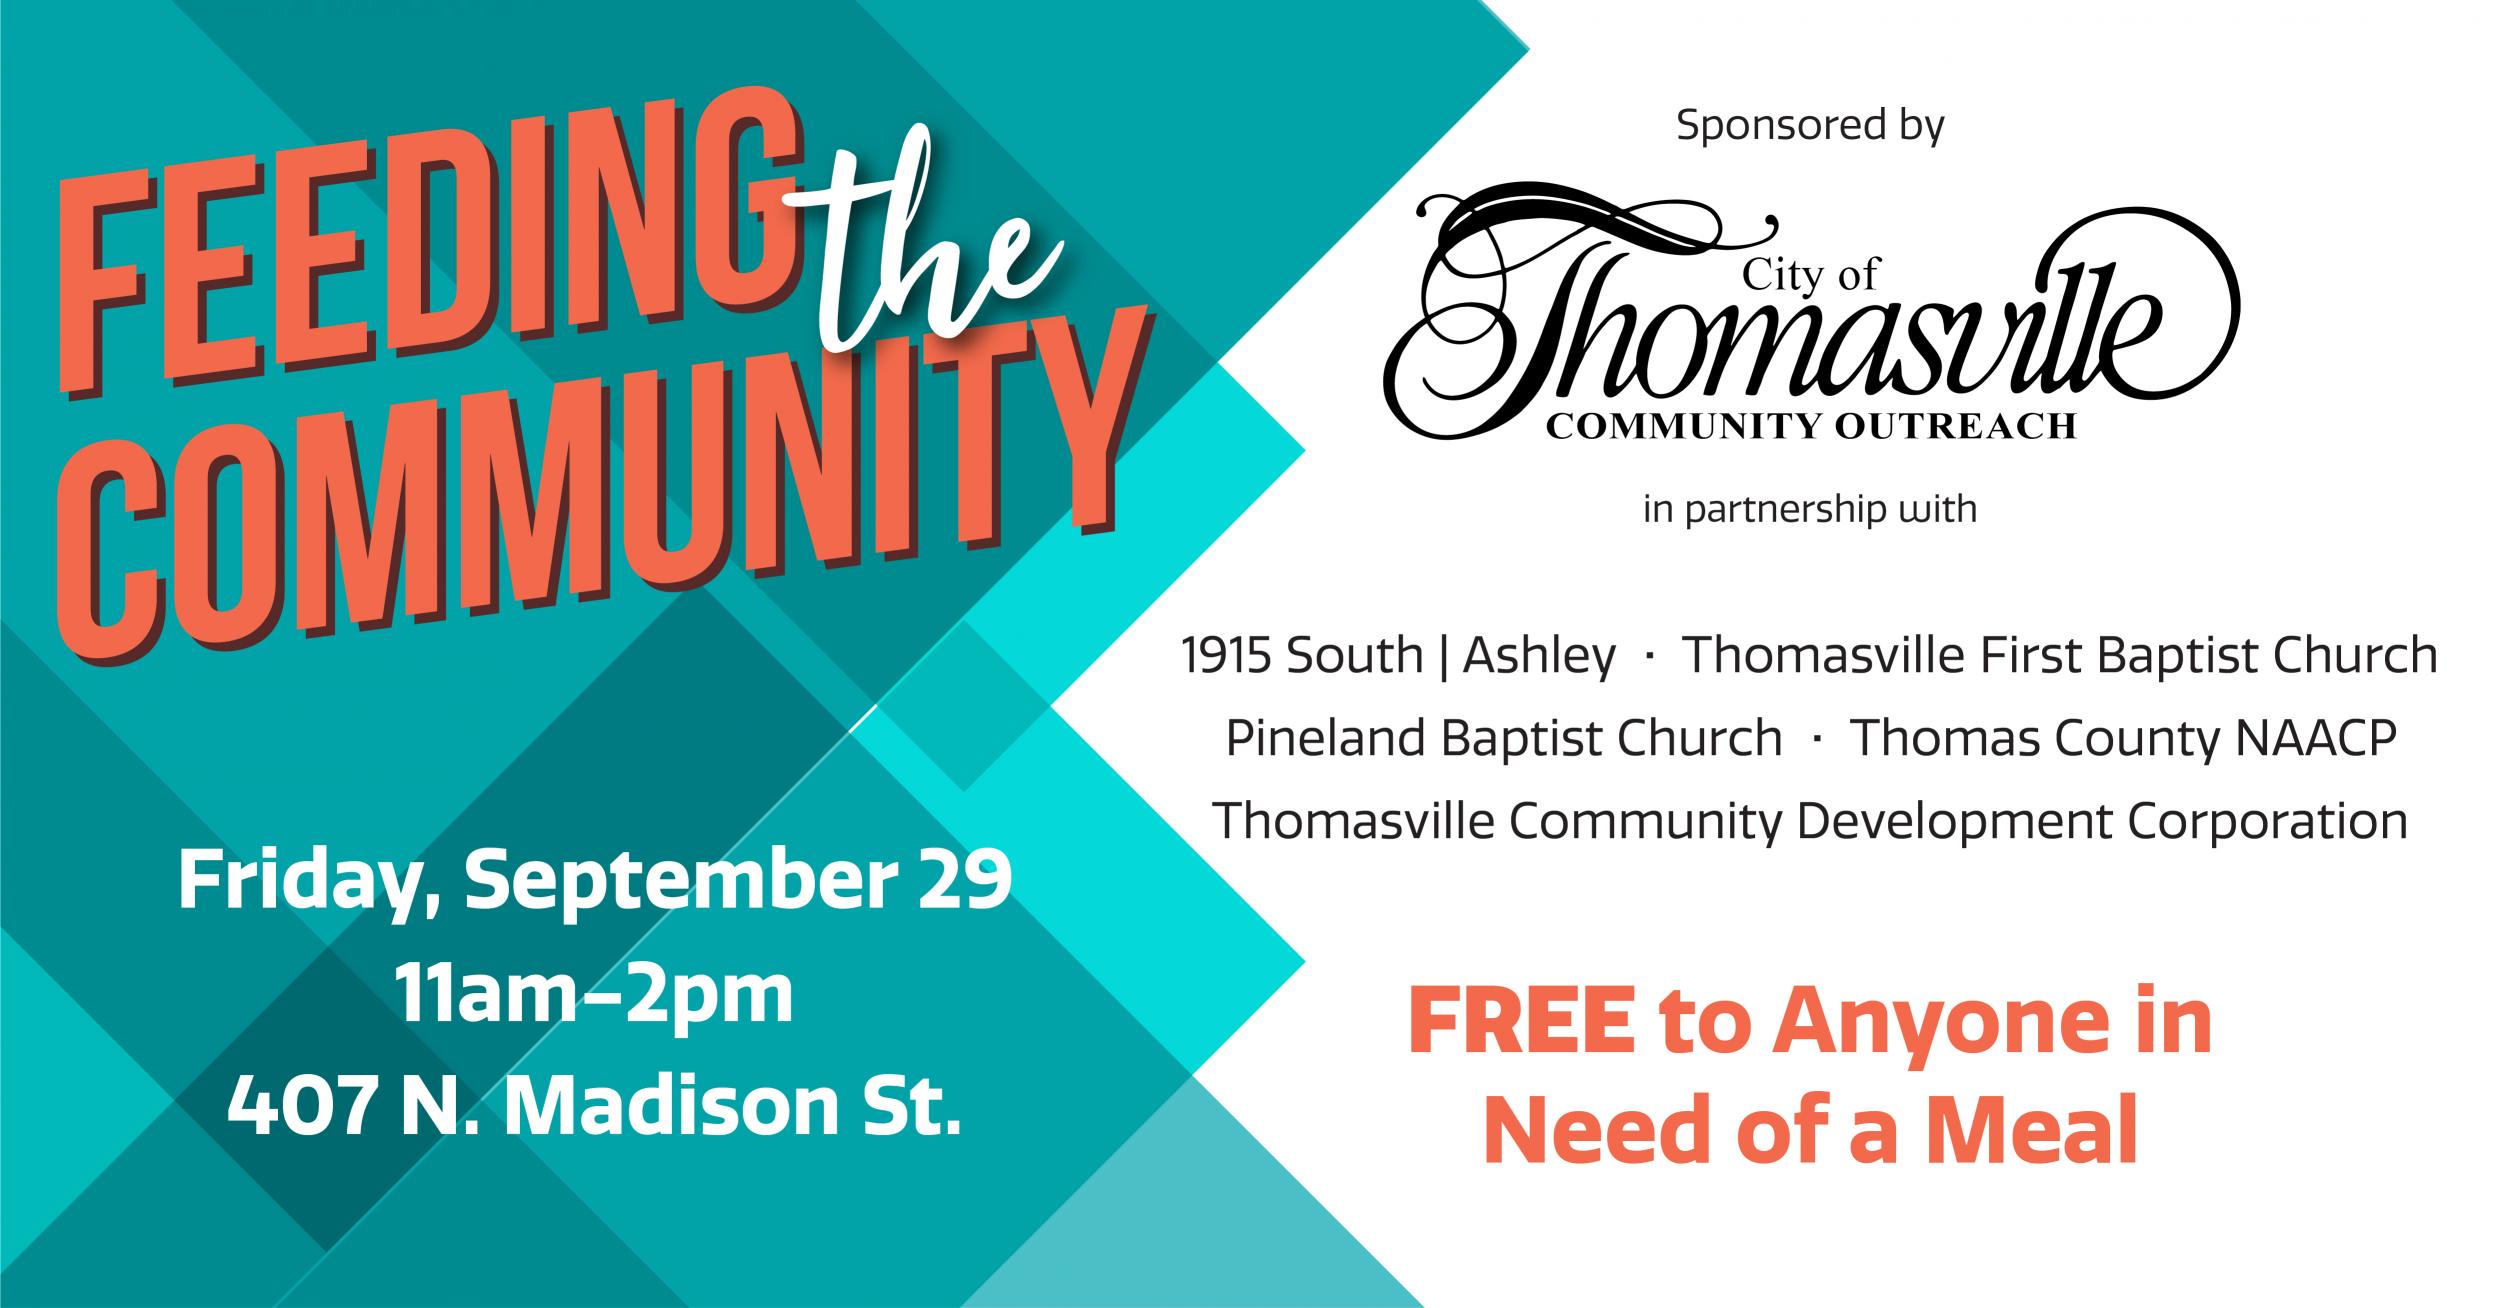 Photo for CITY OF THOMASVILLE ANNOUNCES FEEDING THE COMMUNITY EVENT WITH LOCAL PARTNERS